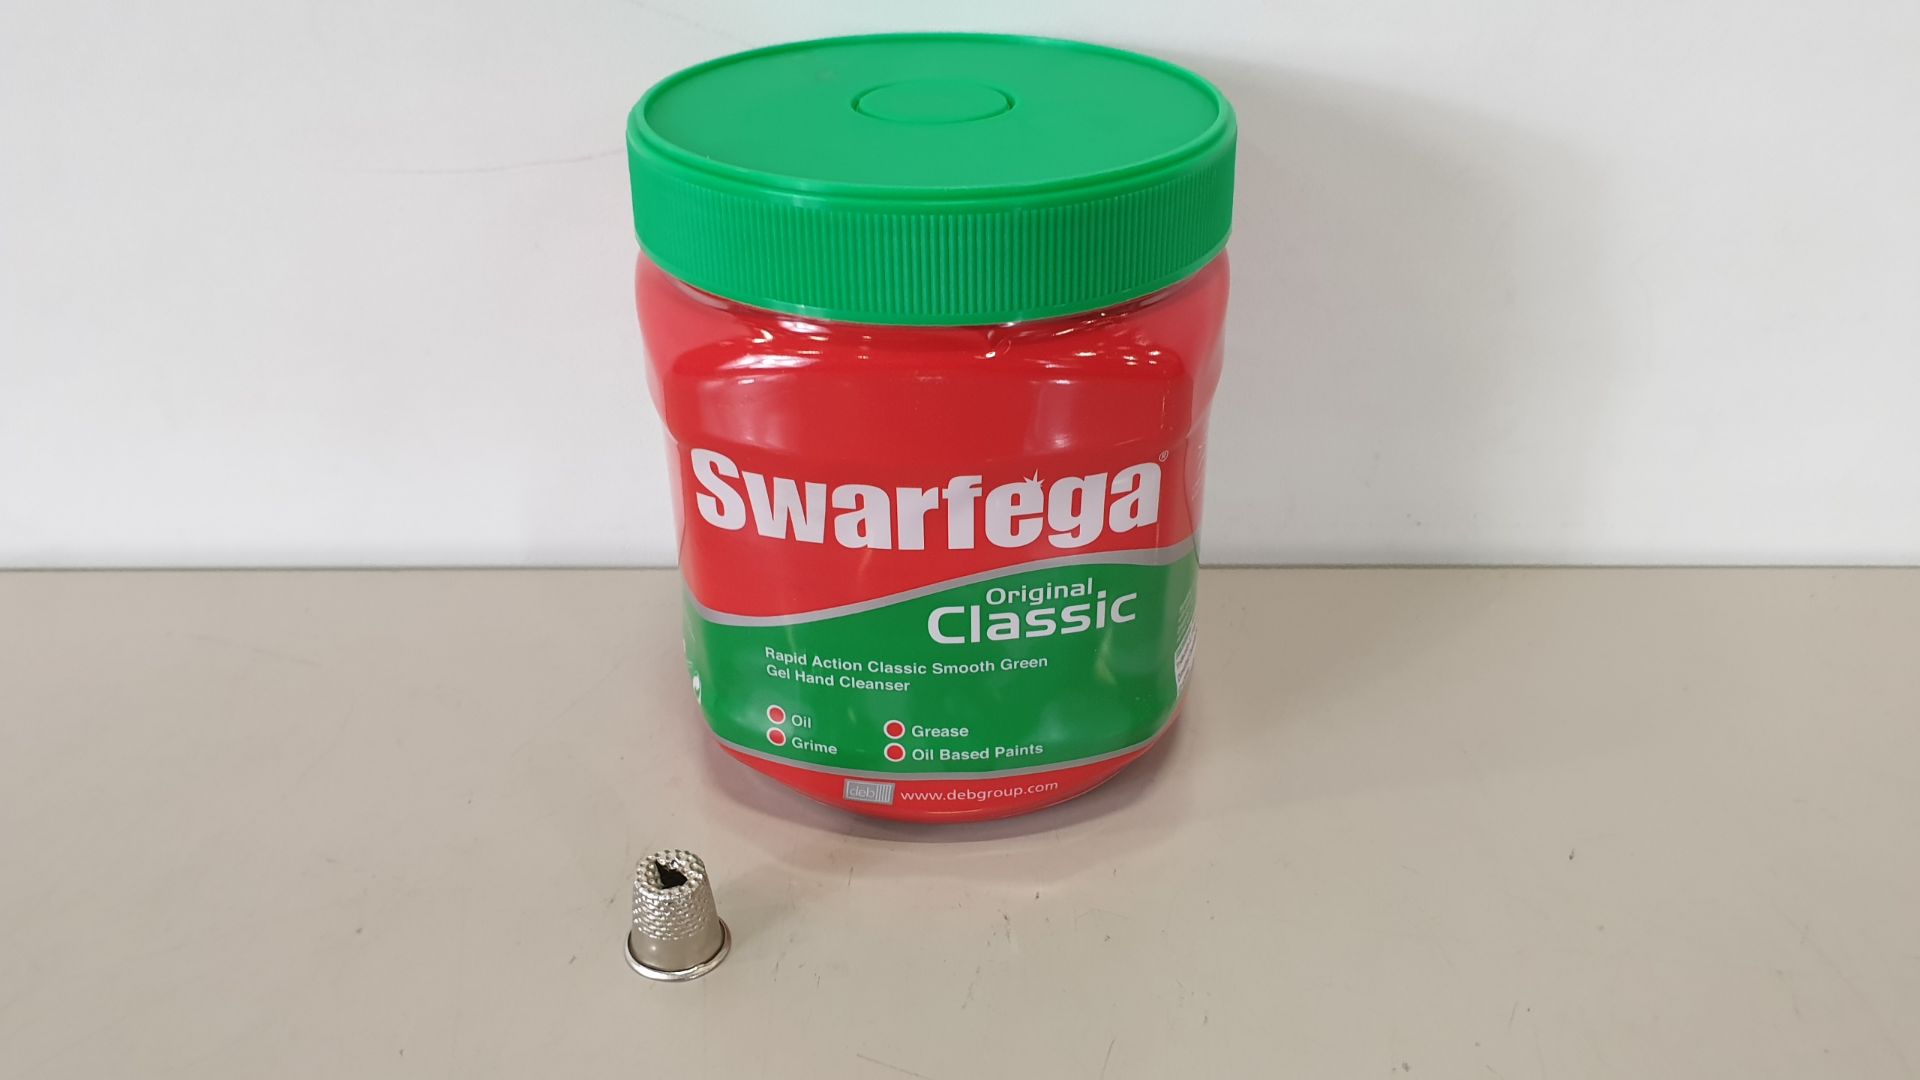 APPROX 160 X SWARFEGA ORIGINAL CLASSIC RAPID ACTION CLASSIC SMOOTH GREEN GEL HAND CLEANSER - ON